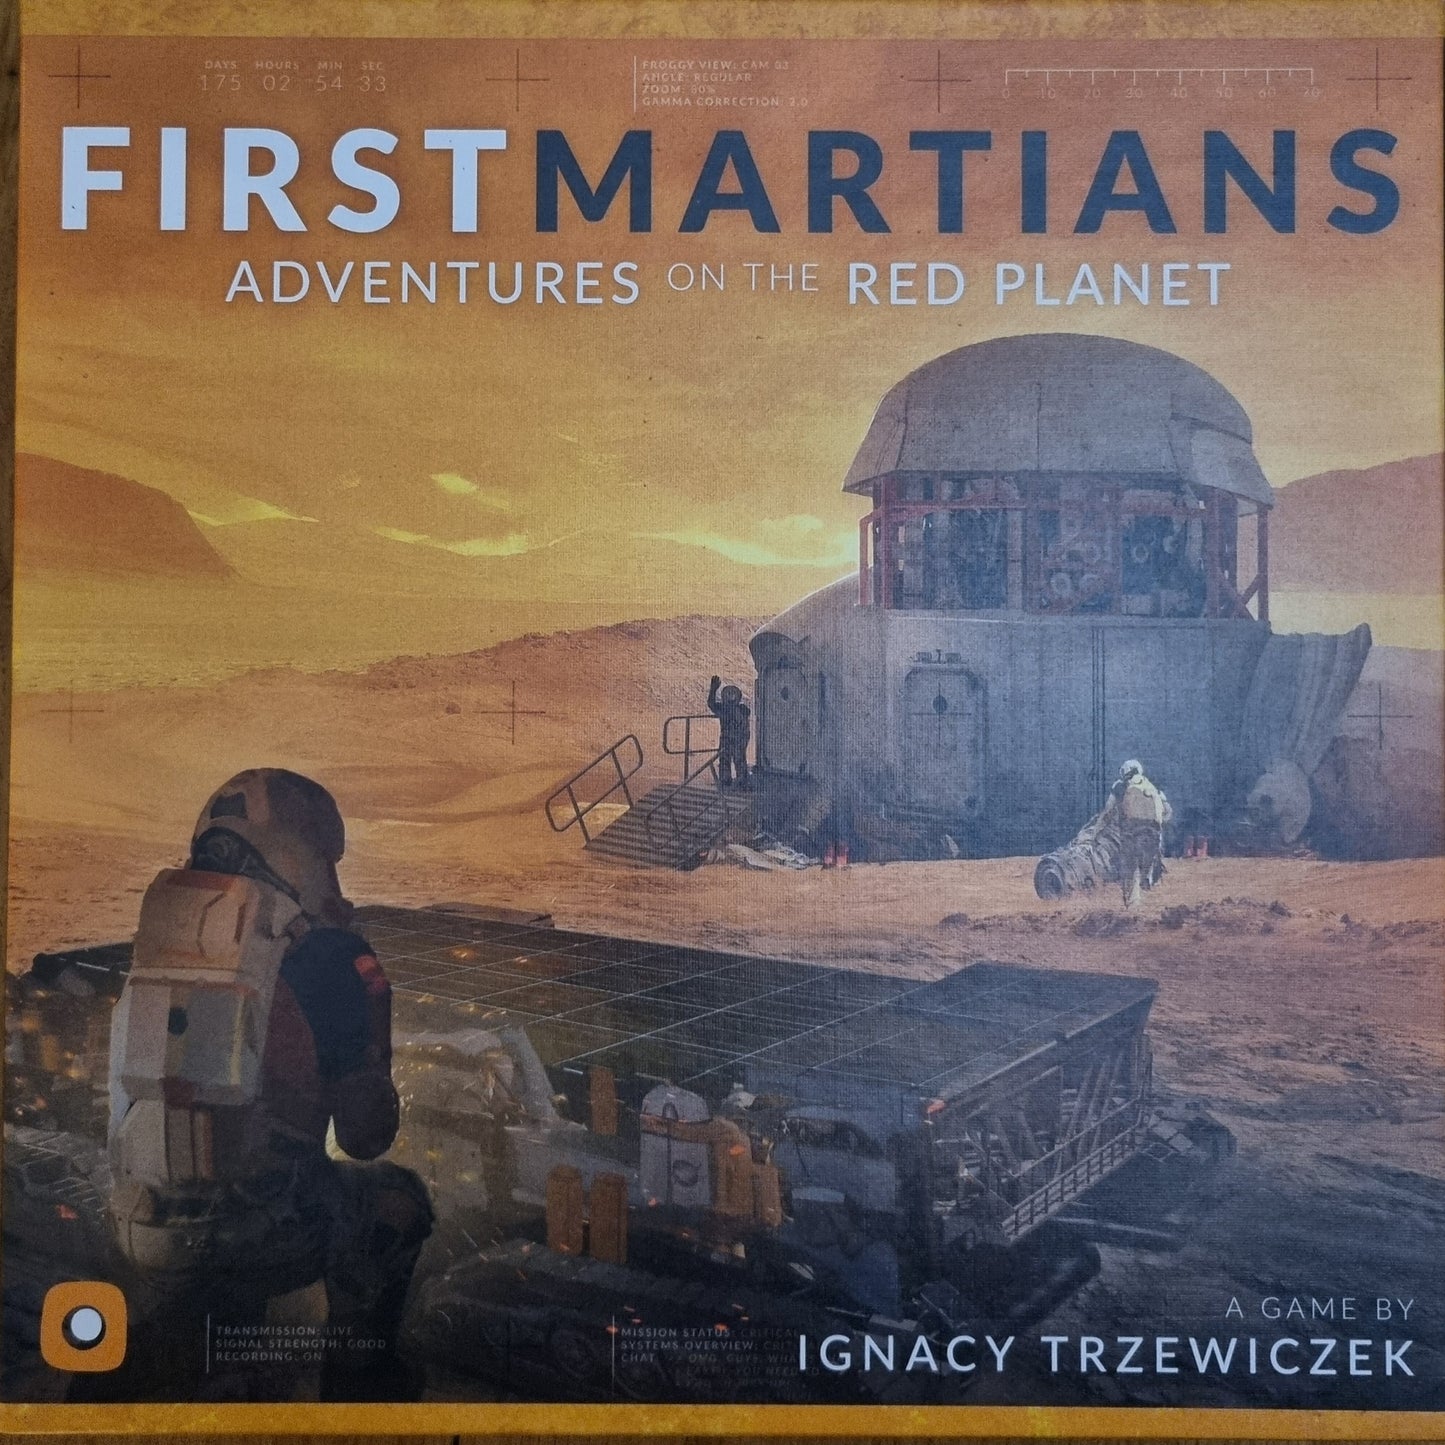 First martians: Adventures on the red planet